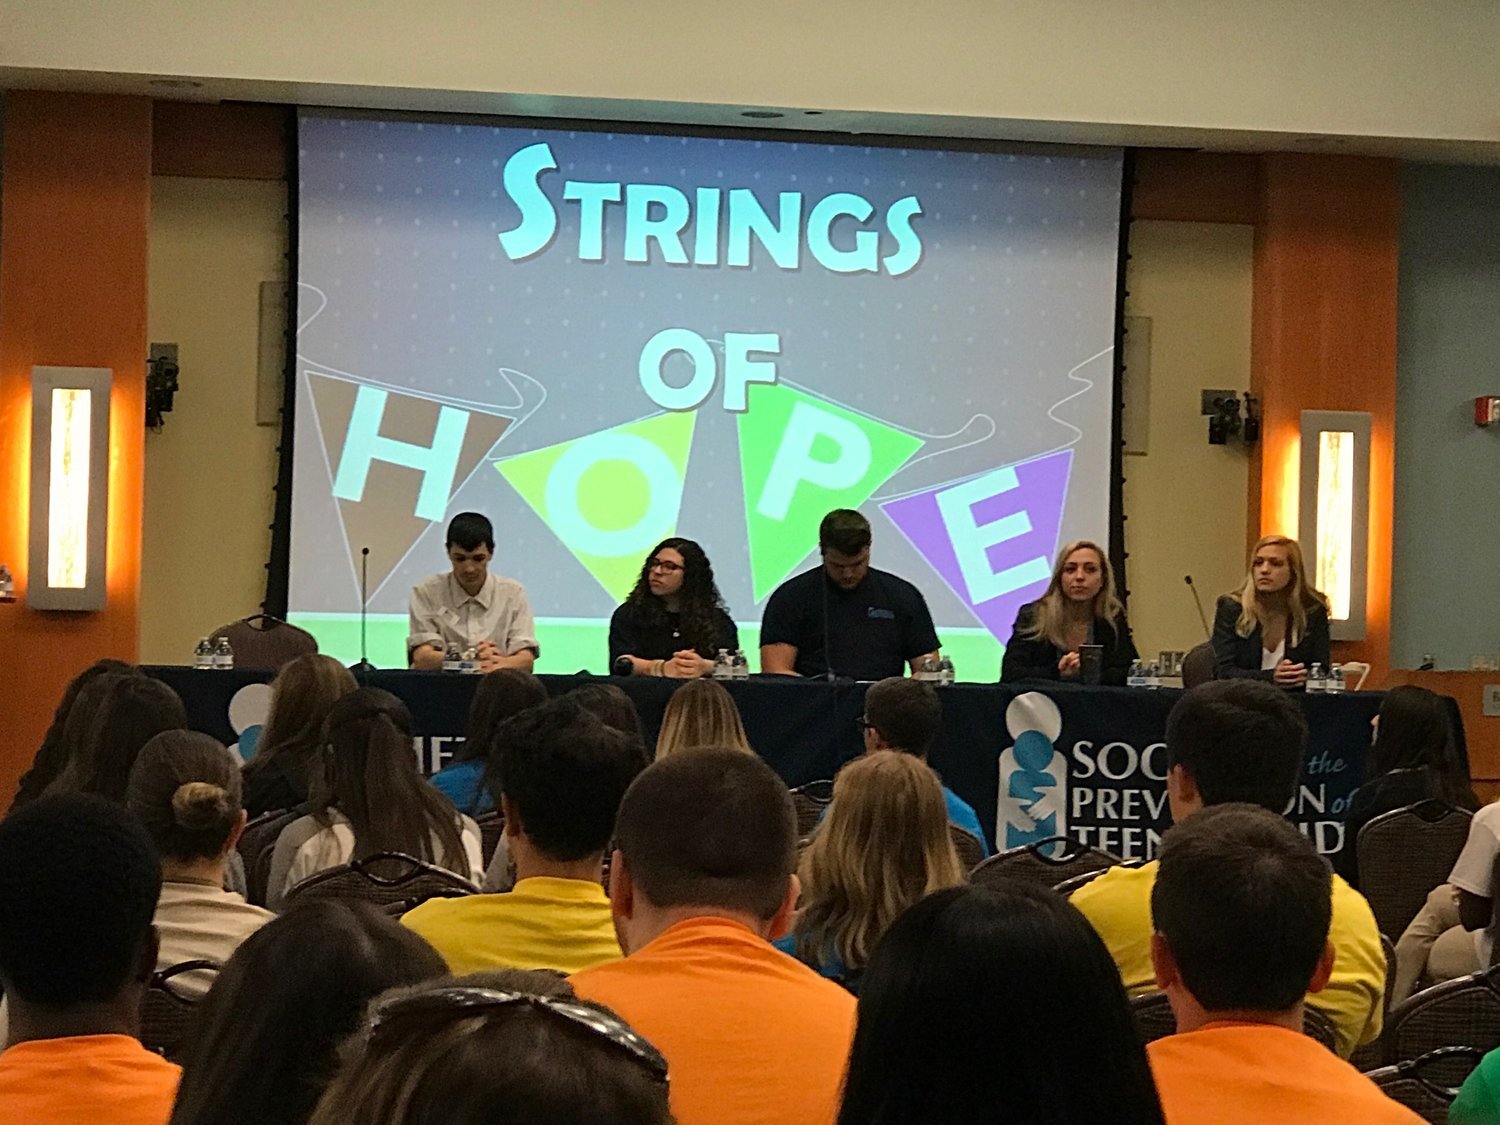 The 2019 summit, above, kicked off with a “Strings of Hope” resiliency panel, led by Stacy Brief, second from left, and others. The same panel started this year’s summit on March 29.